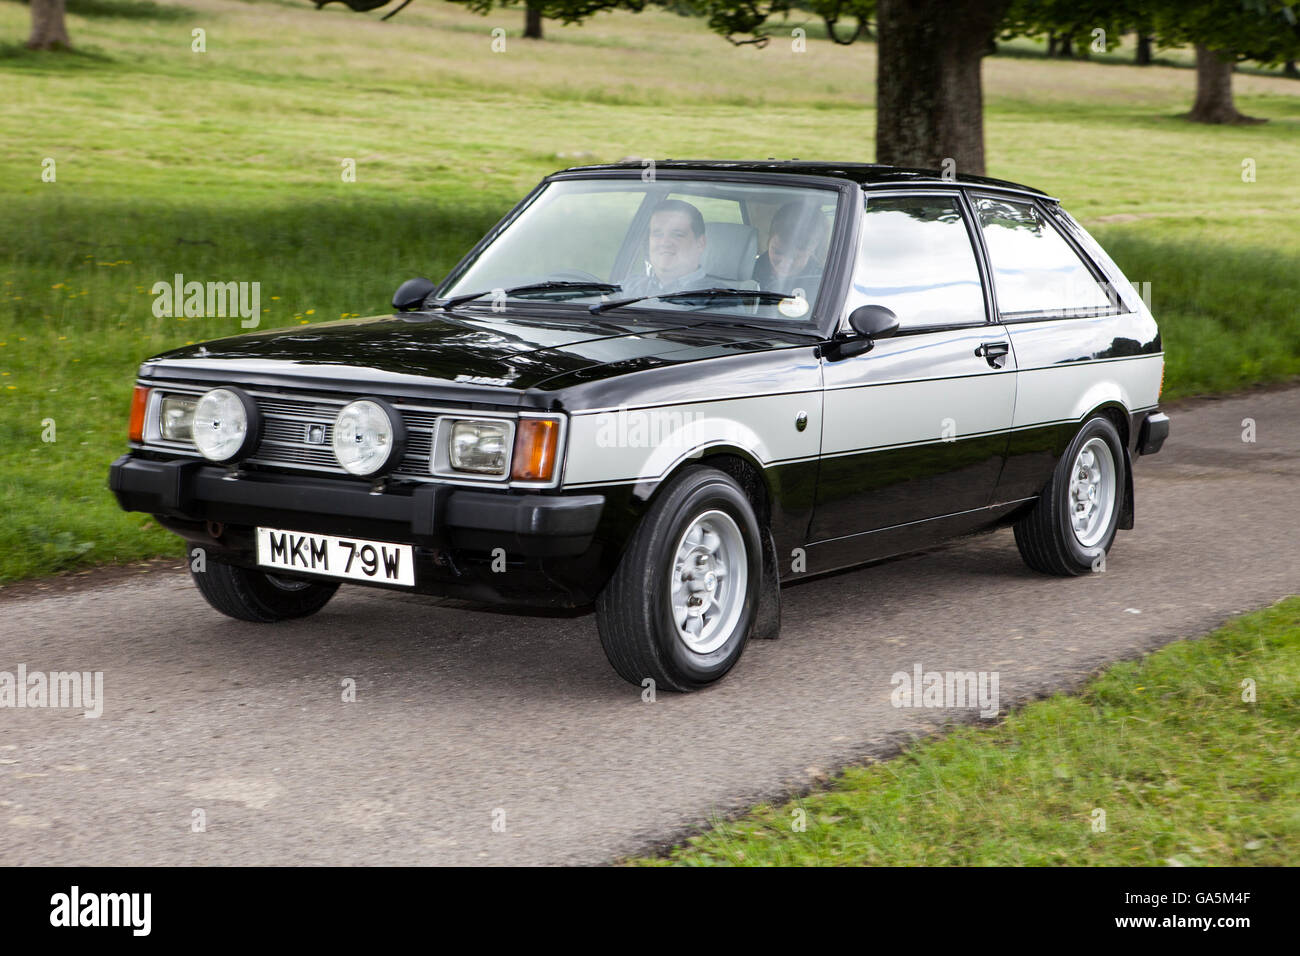 1980 80s black Sunbeam Lotus 2dr saloon at the annual classic car rally in Carnforth in Lancashire.  19809s British classic sports cars at the spectator event drew thousands of visitors to this scenic part of the country on the north west coast of England. Stock Photo